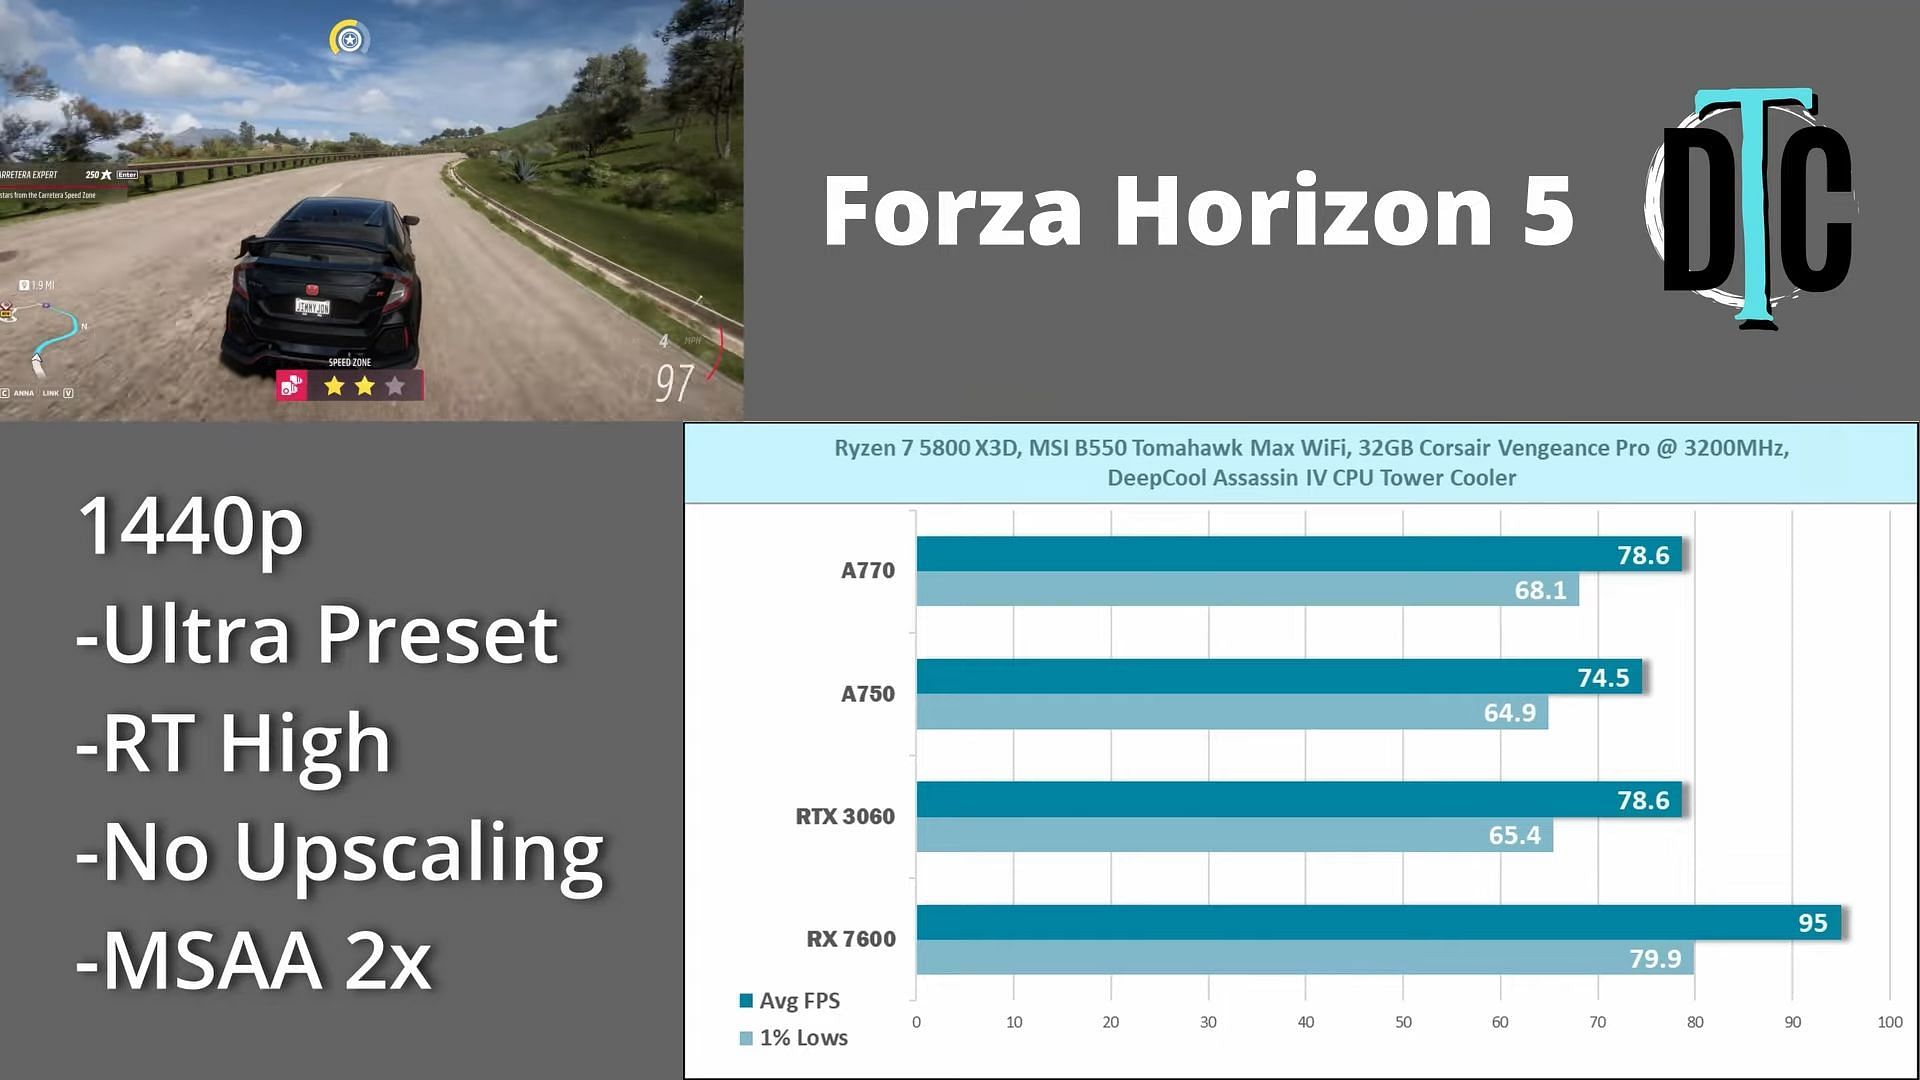 Forza Horizon 5 running at Arc A770 at 1440p with ray tracing (Image via Dannys Gaming Channel/YouTube)